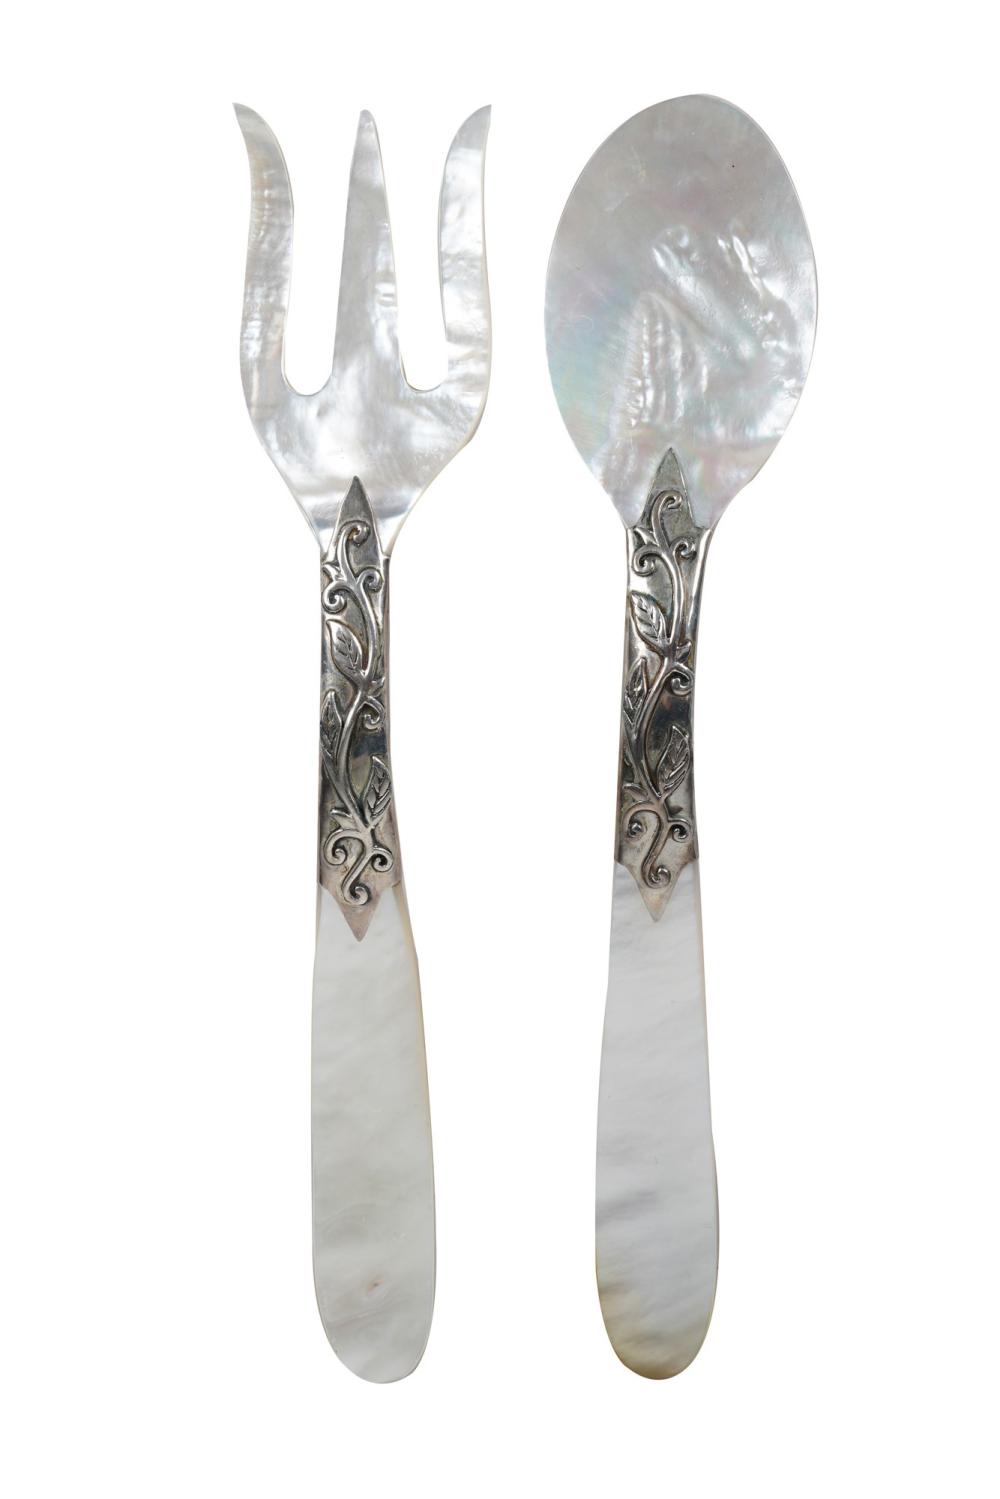 PAIR OF STERLING MOTHER OF PEARL 33637b